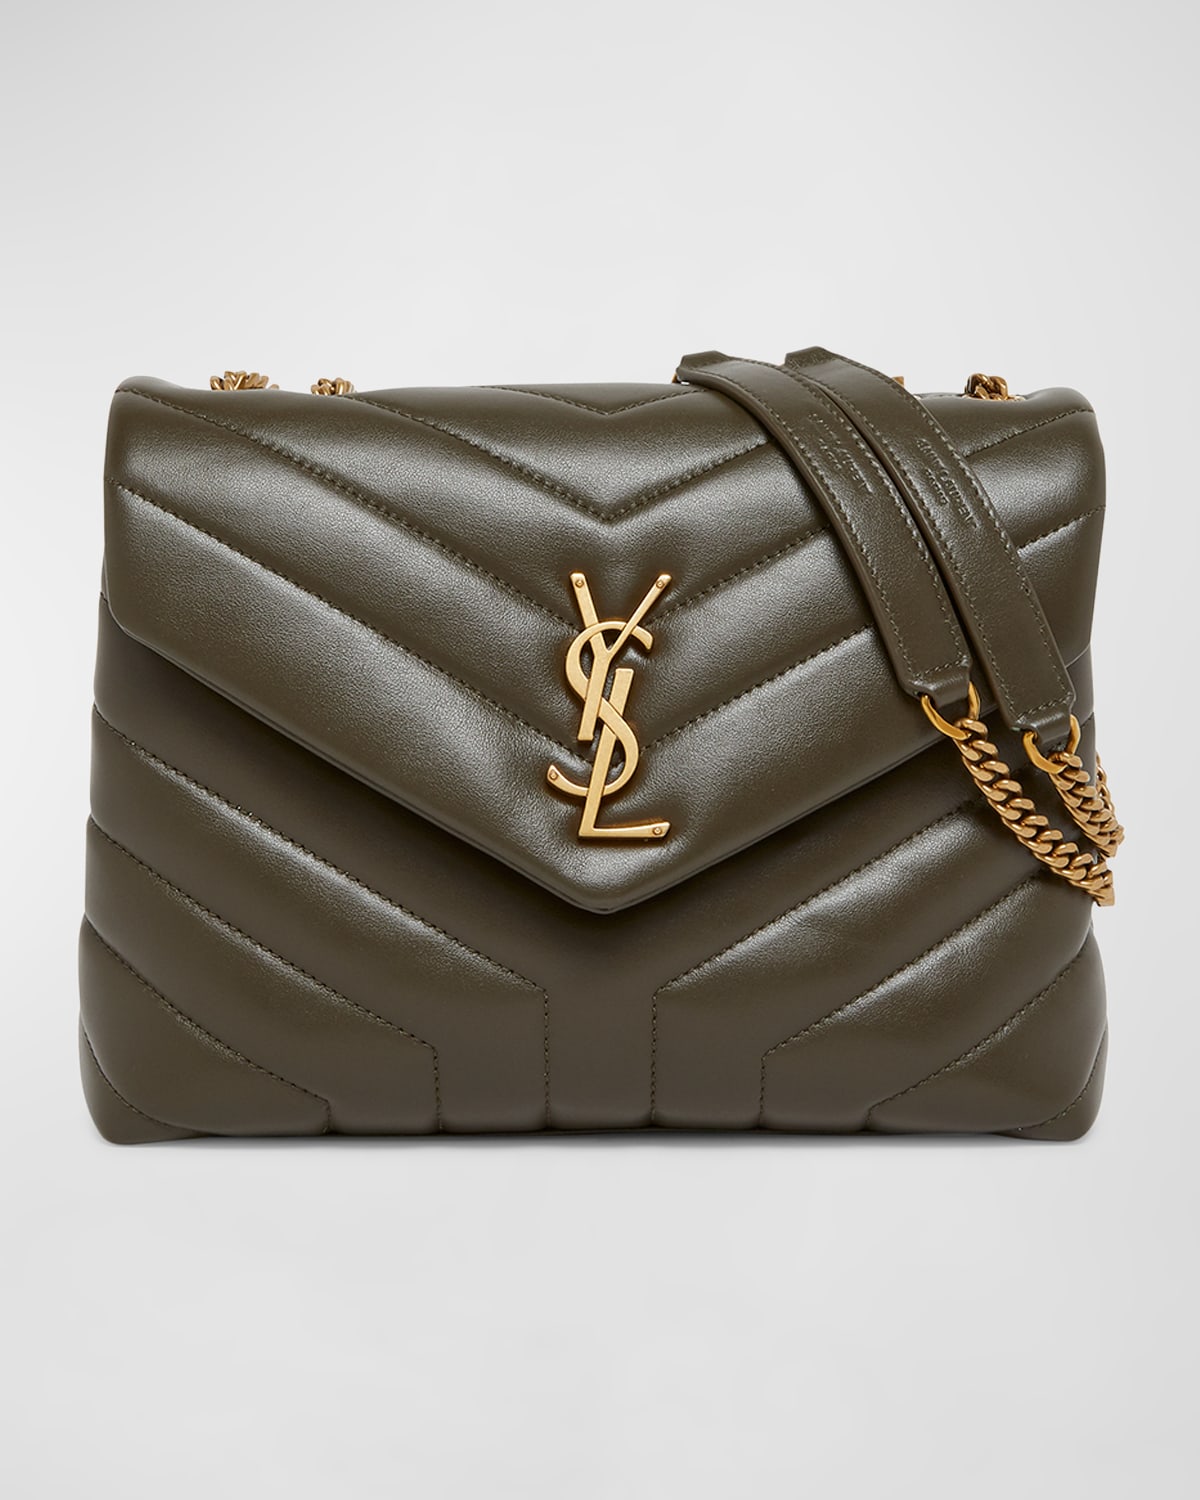 Saint Laurent Loulou Small Ysl Shoulder Bag In Quilted Leather In Light Musk